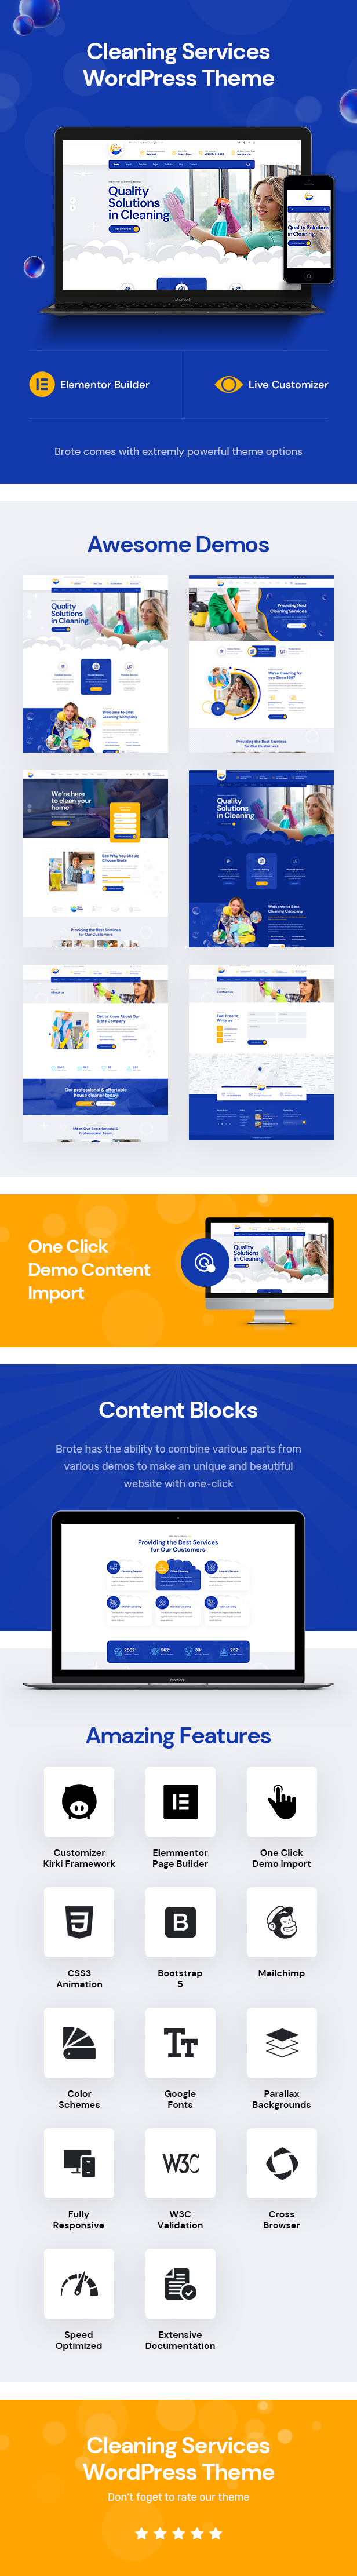 Brote - Cleaning Services WordPress Theme - 1